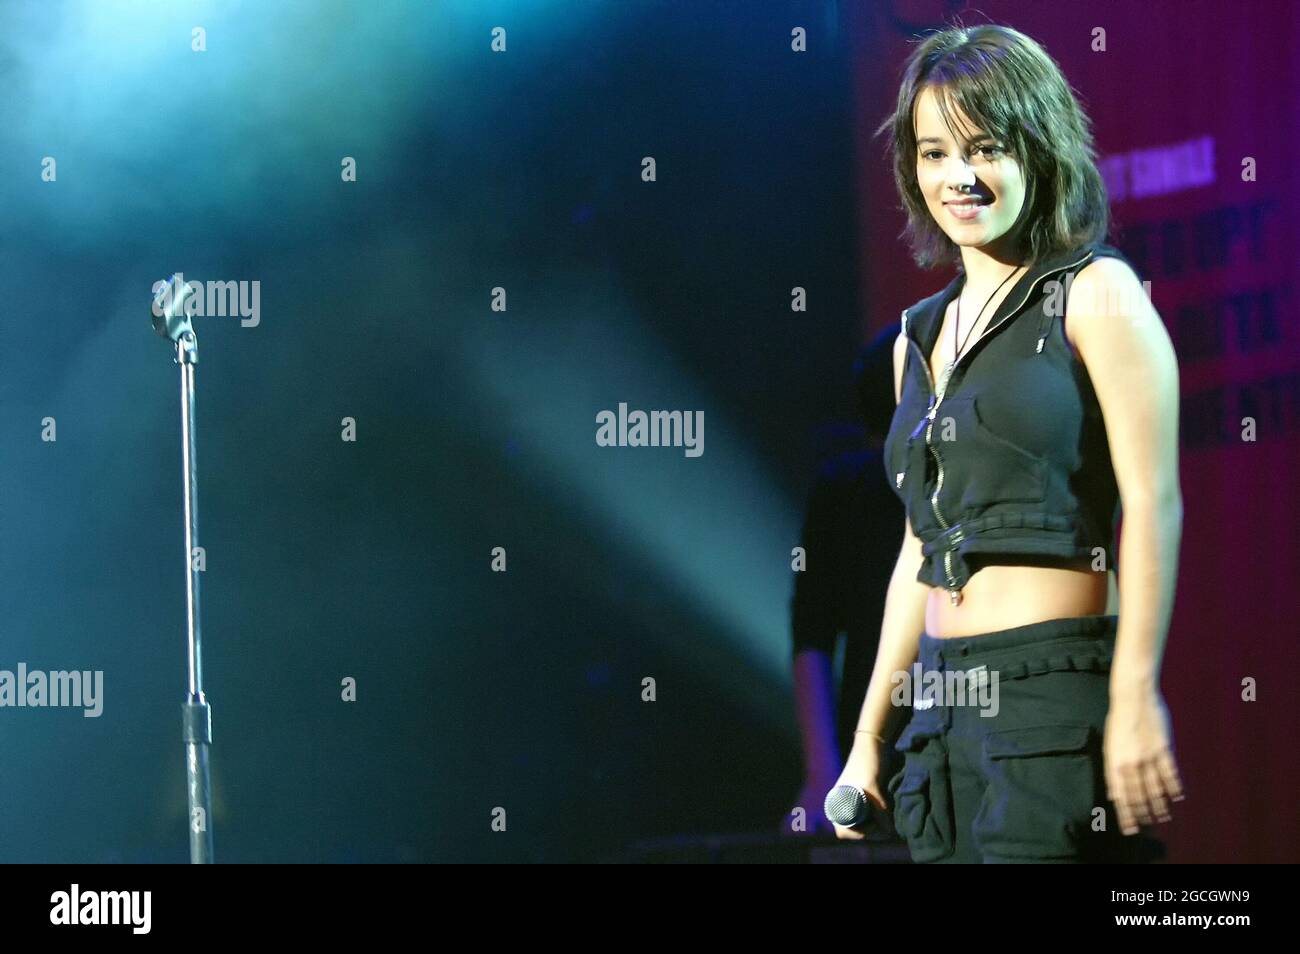 French pop singer Alizee performs on the stage during an her Asia promotion stage in Seoul, South Korea. Stock Photo